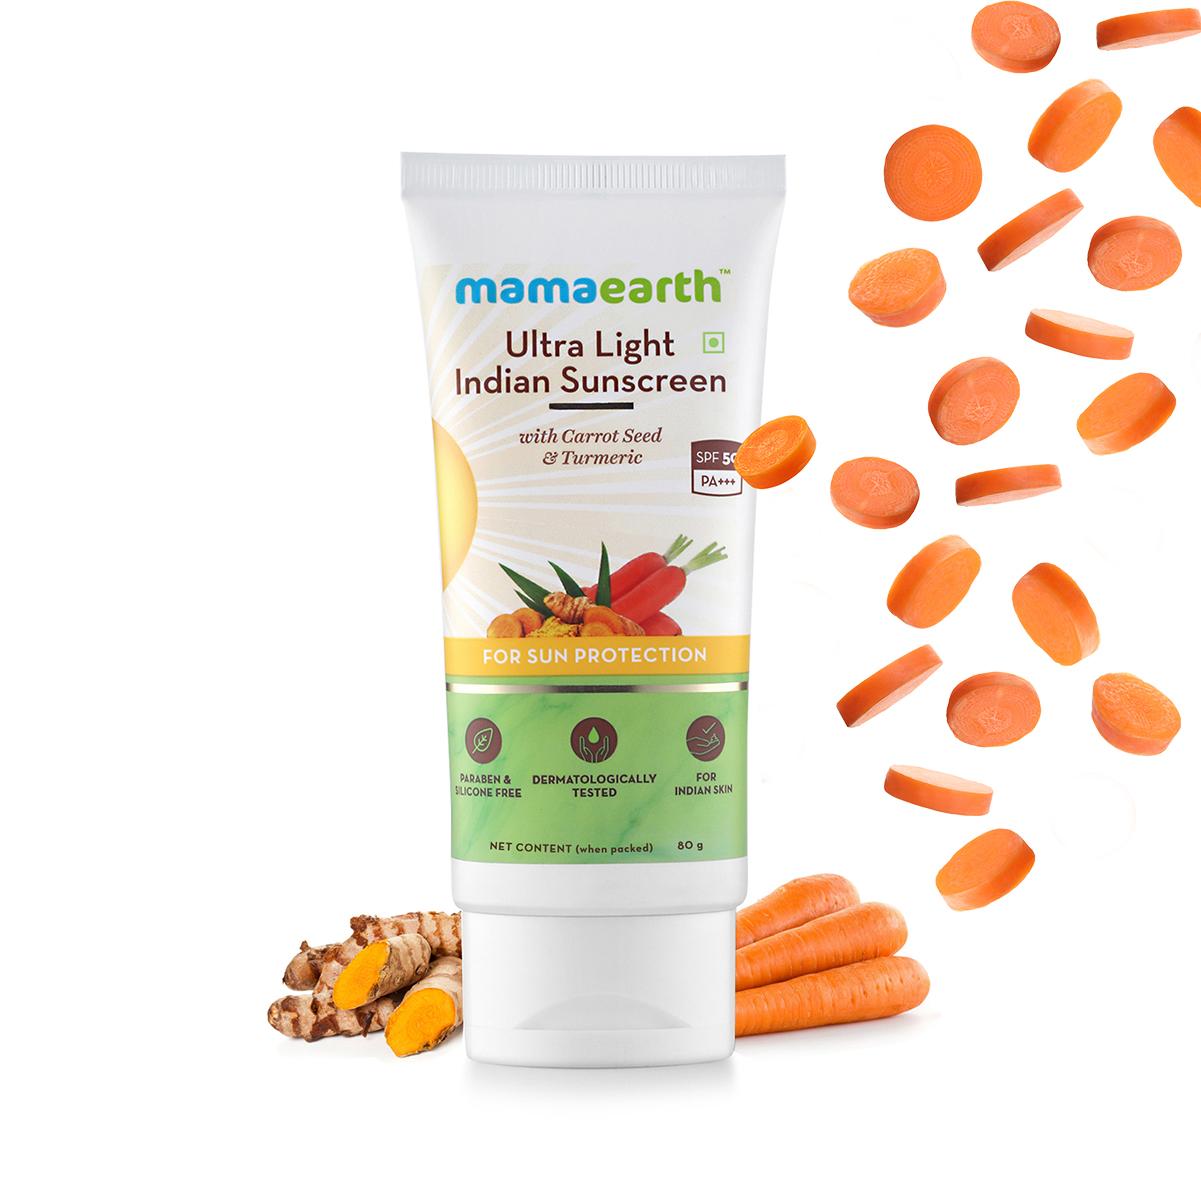 ultra light indian sunscreen with carrot seed, turmeric and spf 50 pa+++ - 80g